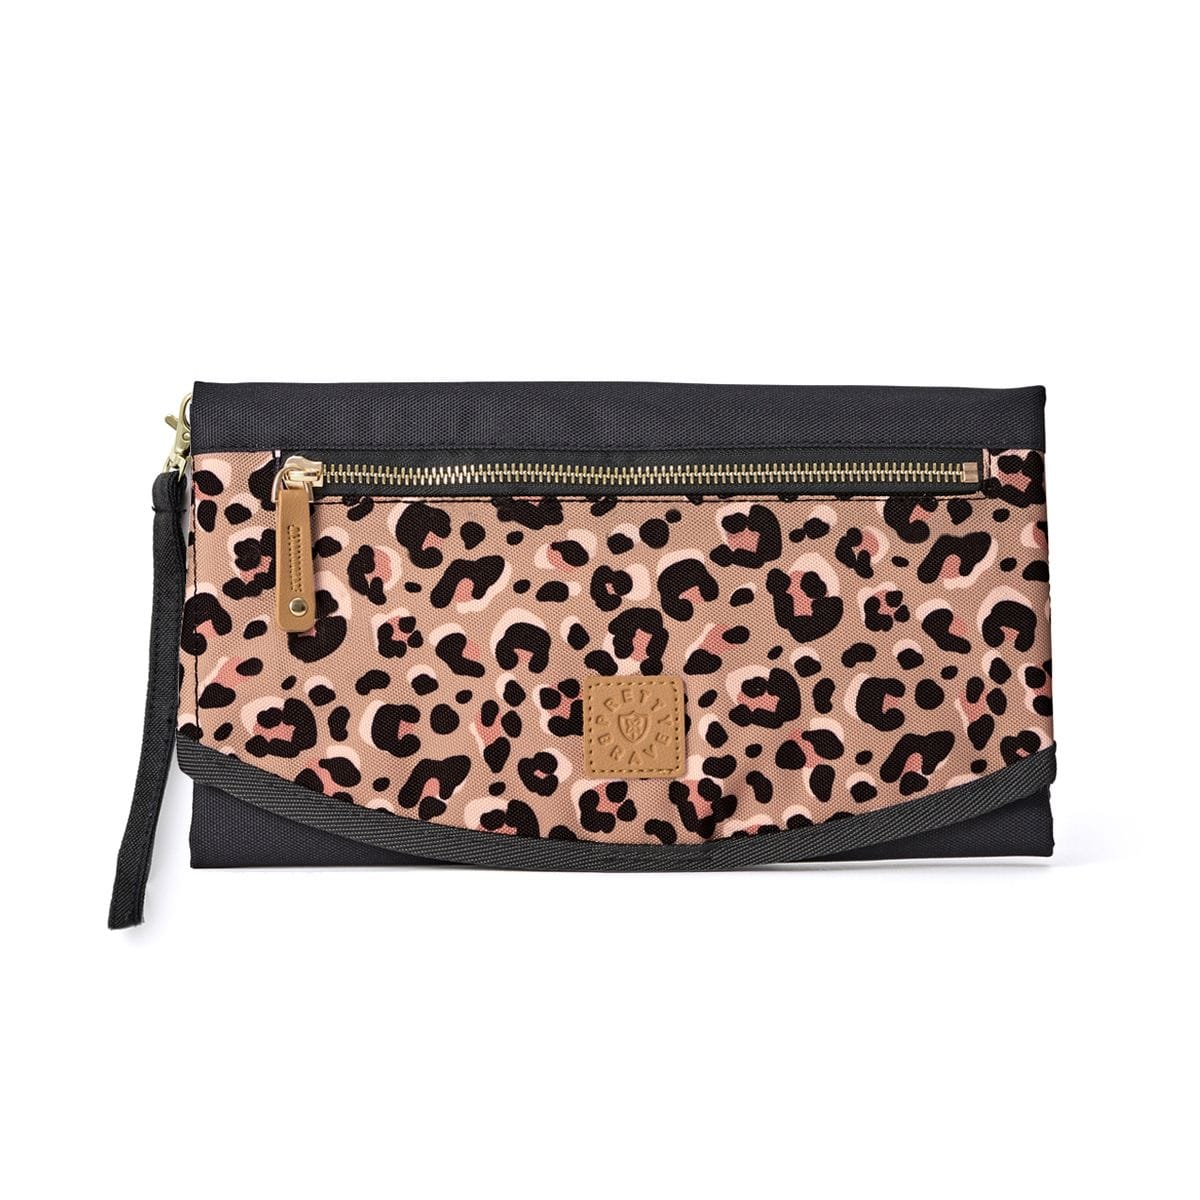 Pretty Brave Baby Accessory Roundabout Change Clutch